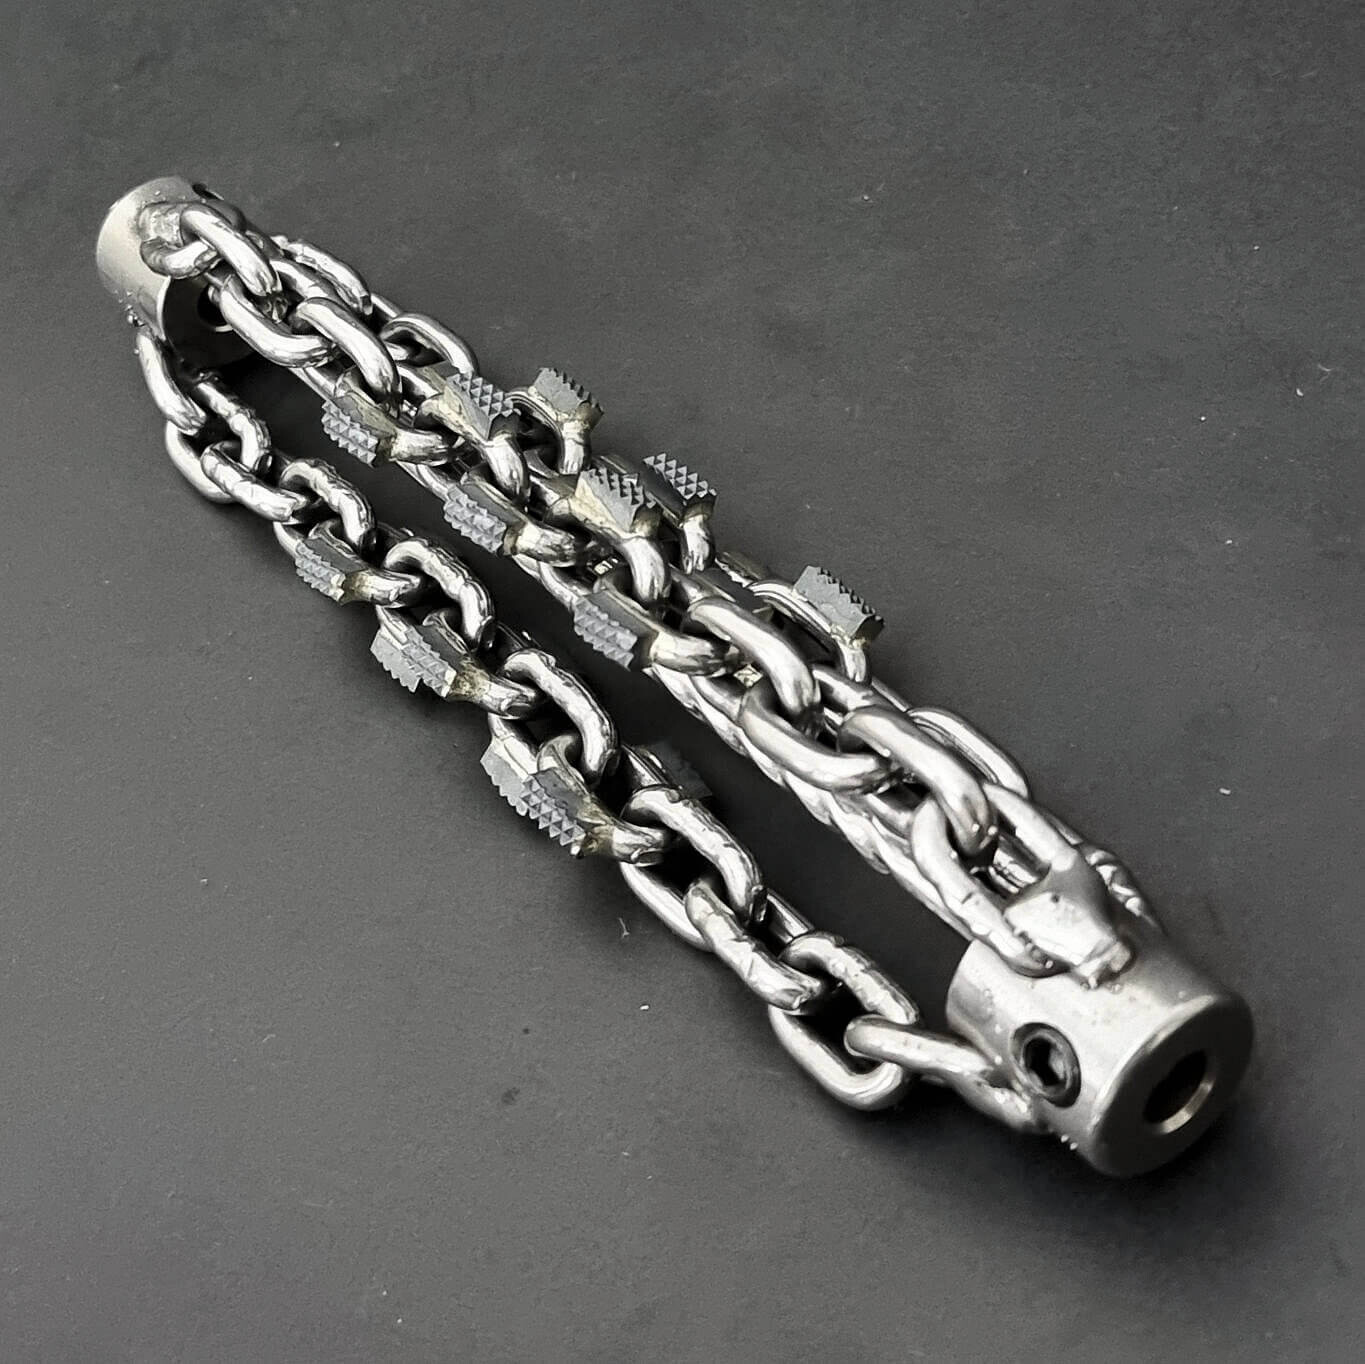 Lightweight - Croco Chain (Cast Iron & Clay Pipes) perfect drain cleaner to use with your Ridgid flexi shaft or Picote toilet auger